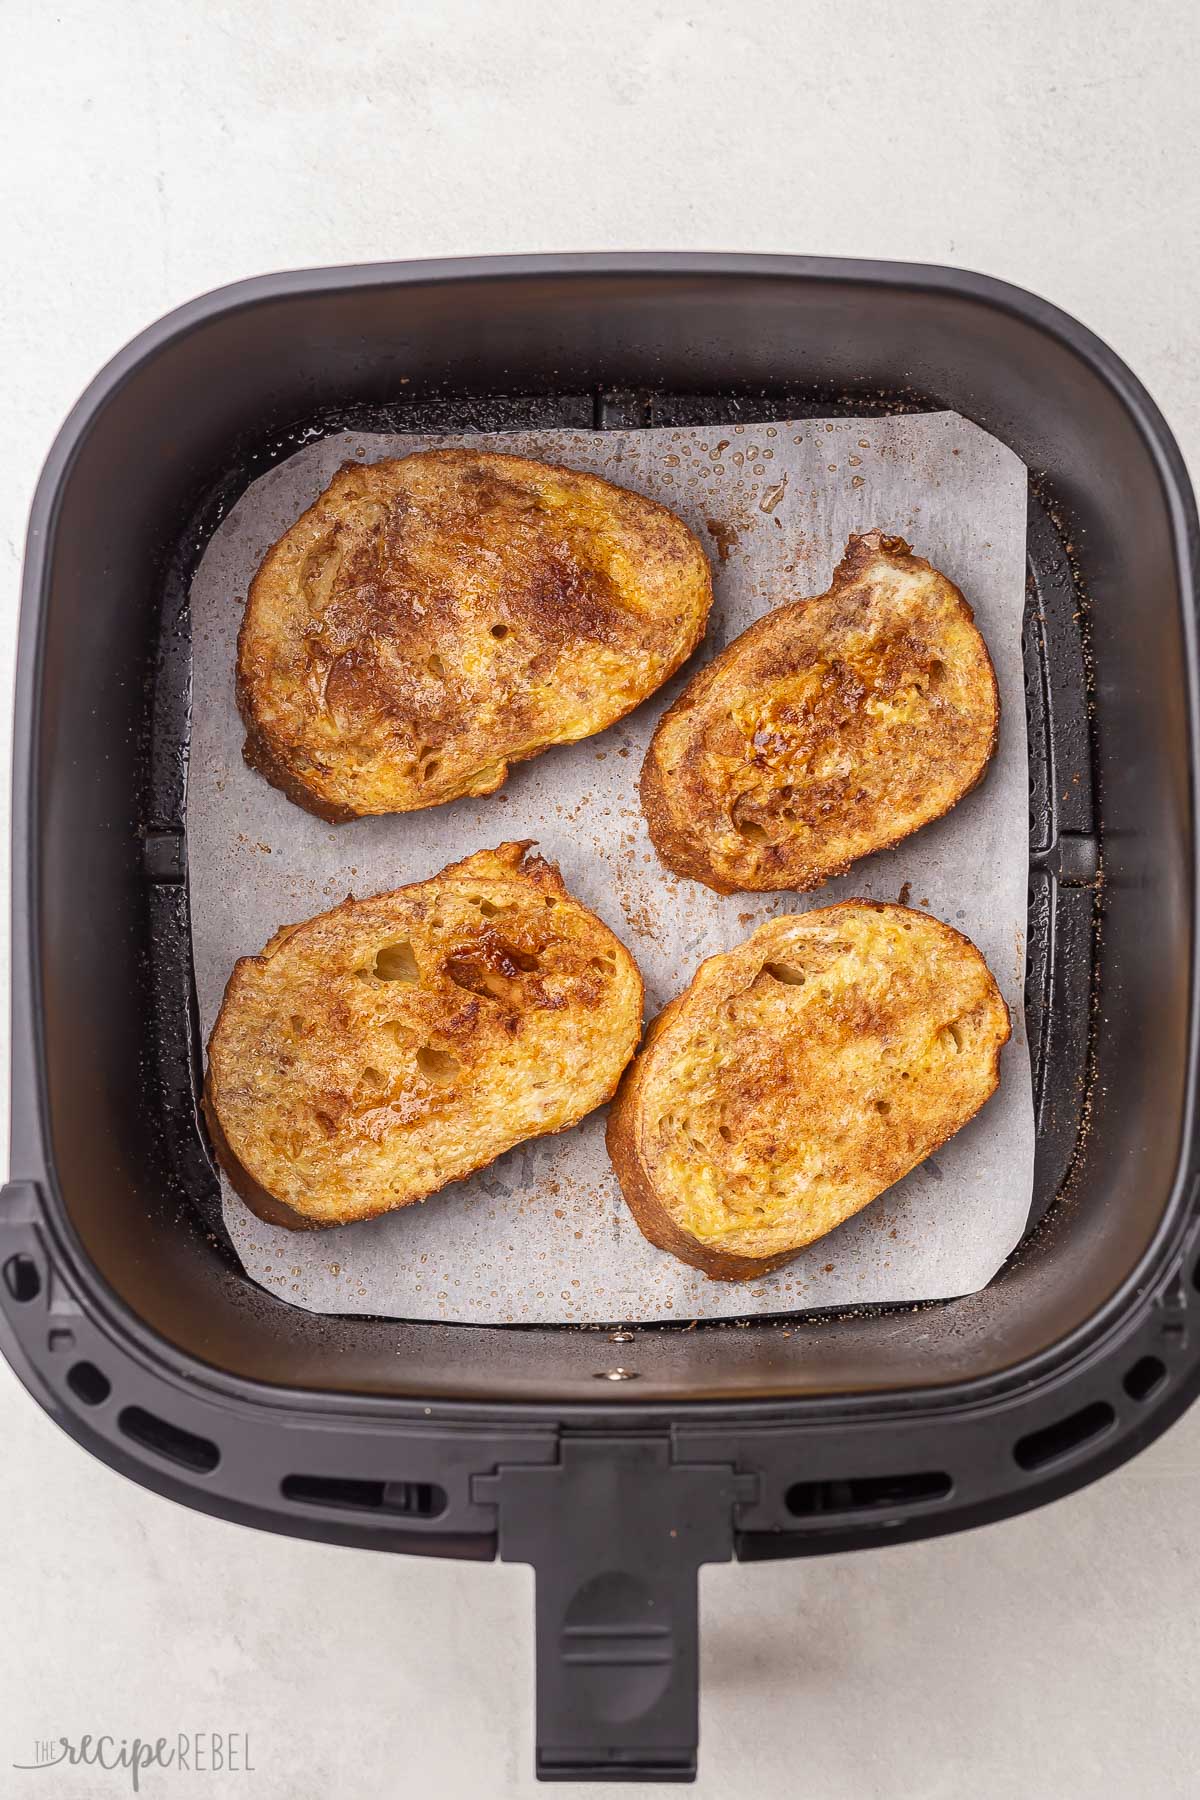 four pieces of fried french toast lying on parchment paper in air fryer basket.